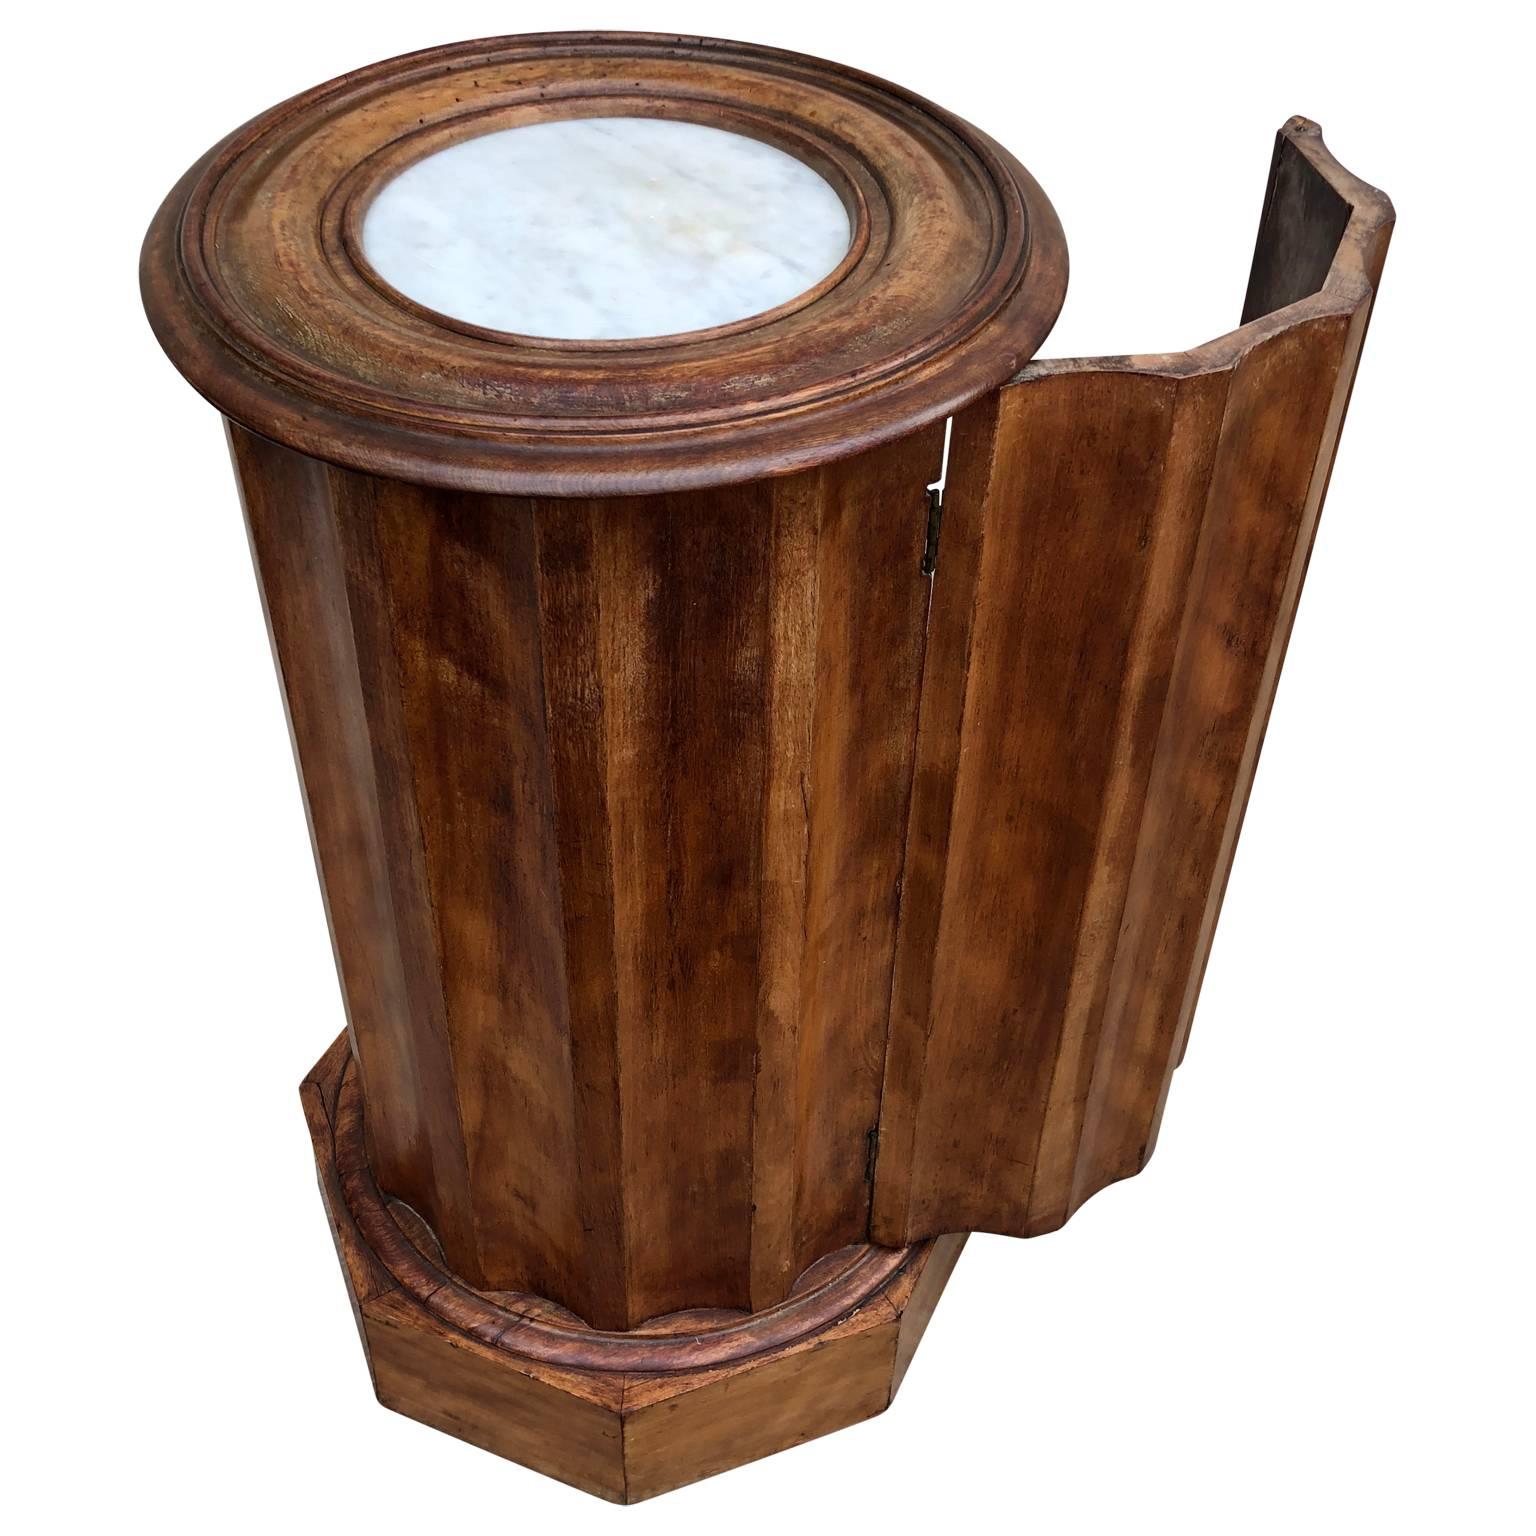 French 19th century Neo-classical style fluted wood and marble-top pedestal.
This wooden pedestal has two shelves behind a hidden door. The circular marble inlay on top makes the piece especially eye catching. It will serve as a plant stand or as a